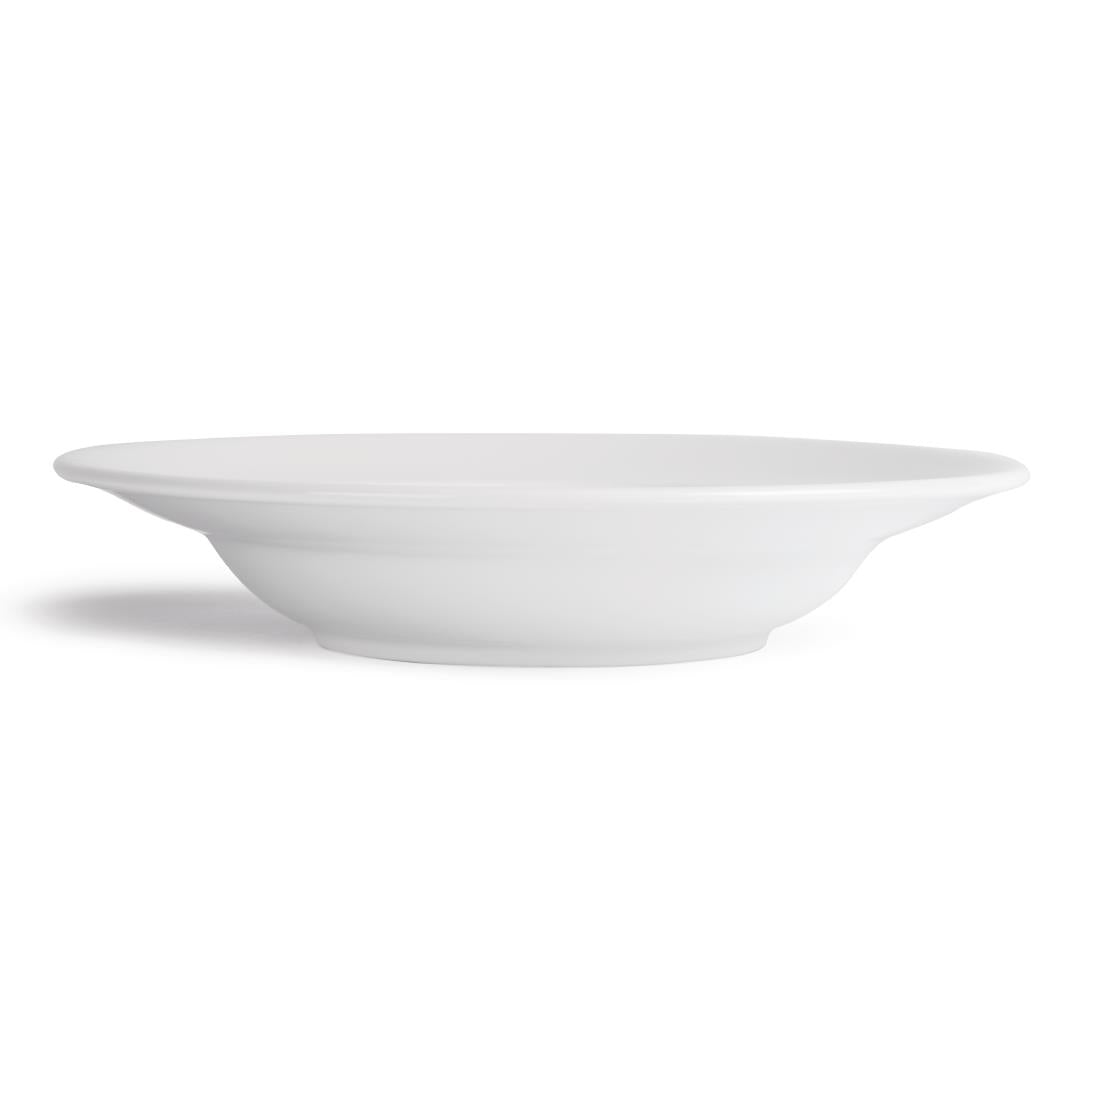 CG057 Royal Porcelain Classic White Pasta Plates 260mm (Pack of 12)